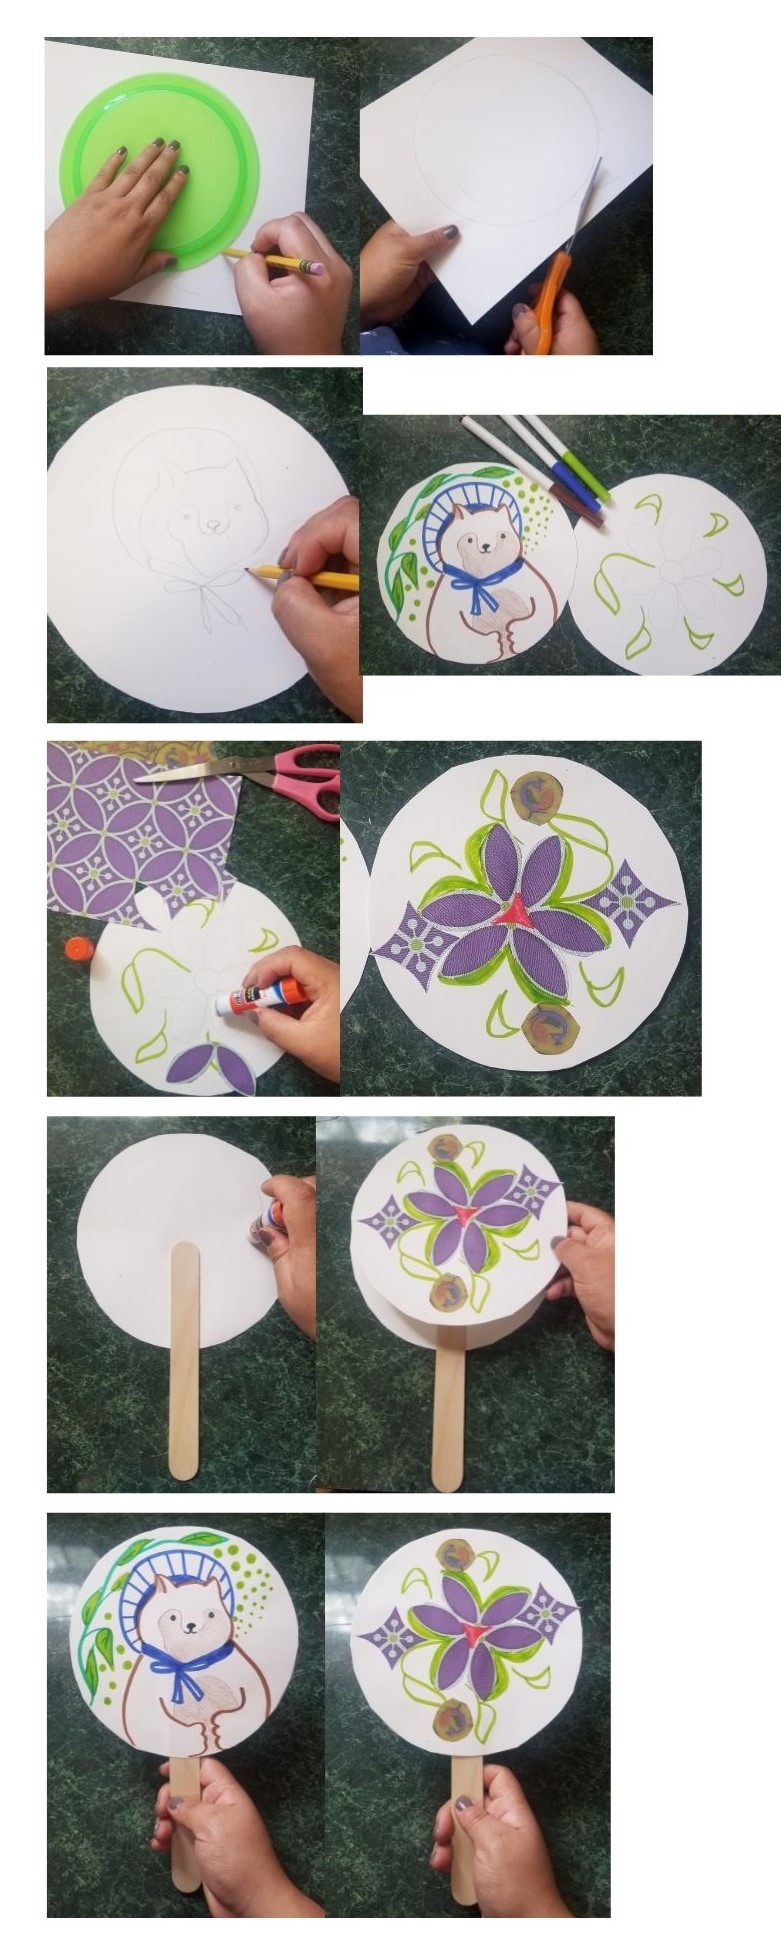 A grouping of images showing the steps of how to create a Japanese style fan using two card stock sheets and a popsicle stick.   